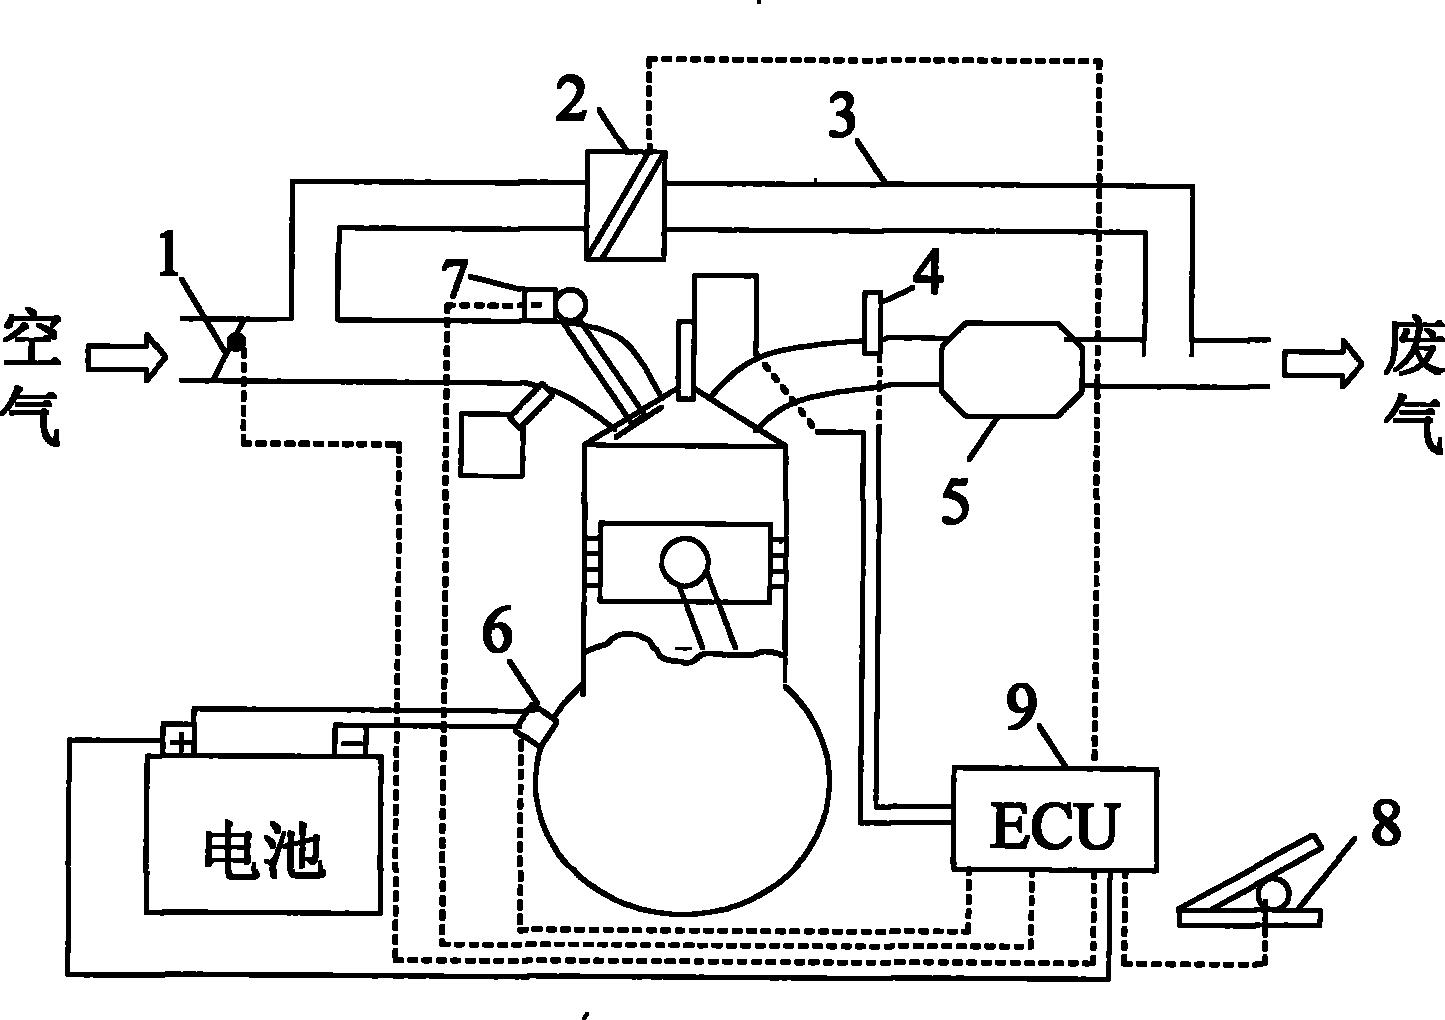 Apparatus for controlling discharge of hydrogen internal combustion engine by thermal exhaust recirculation